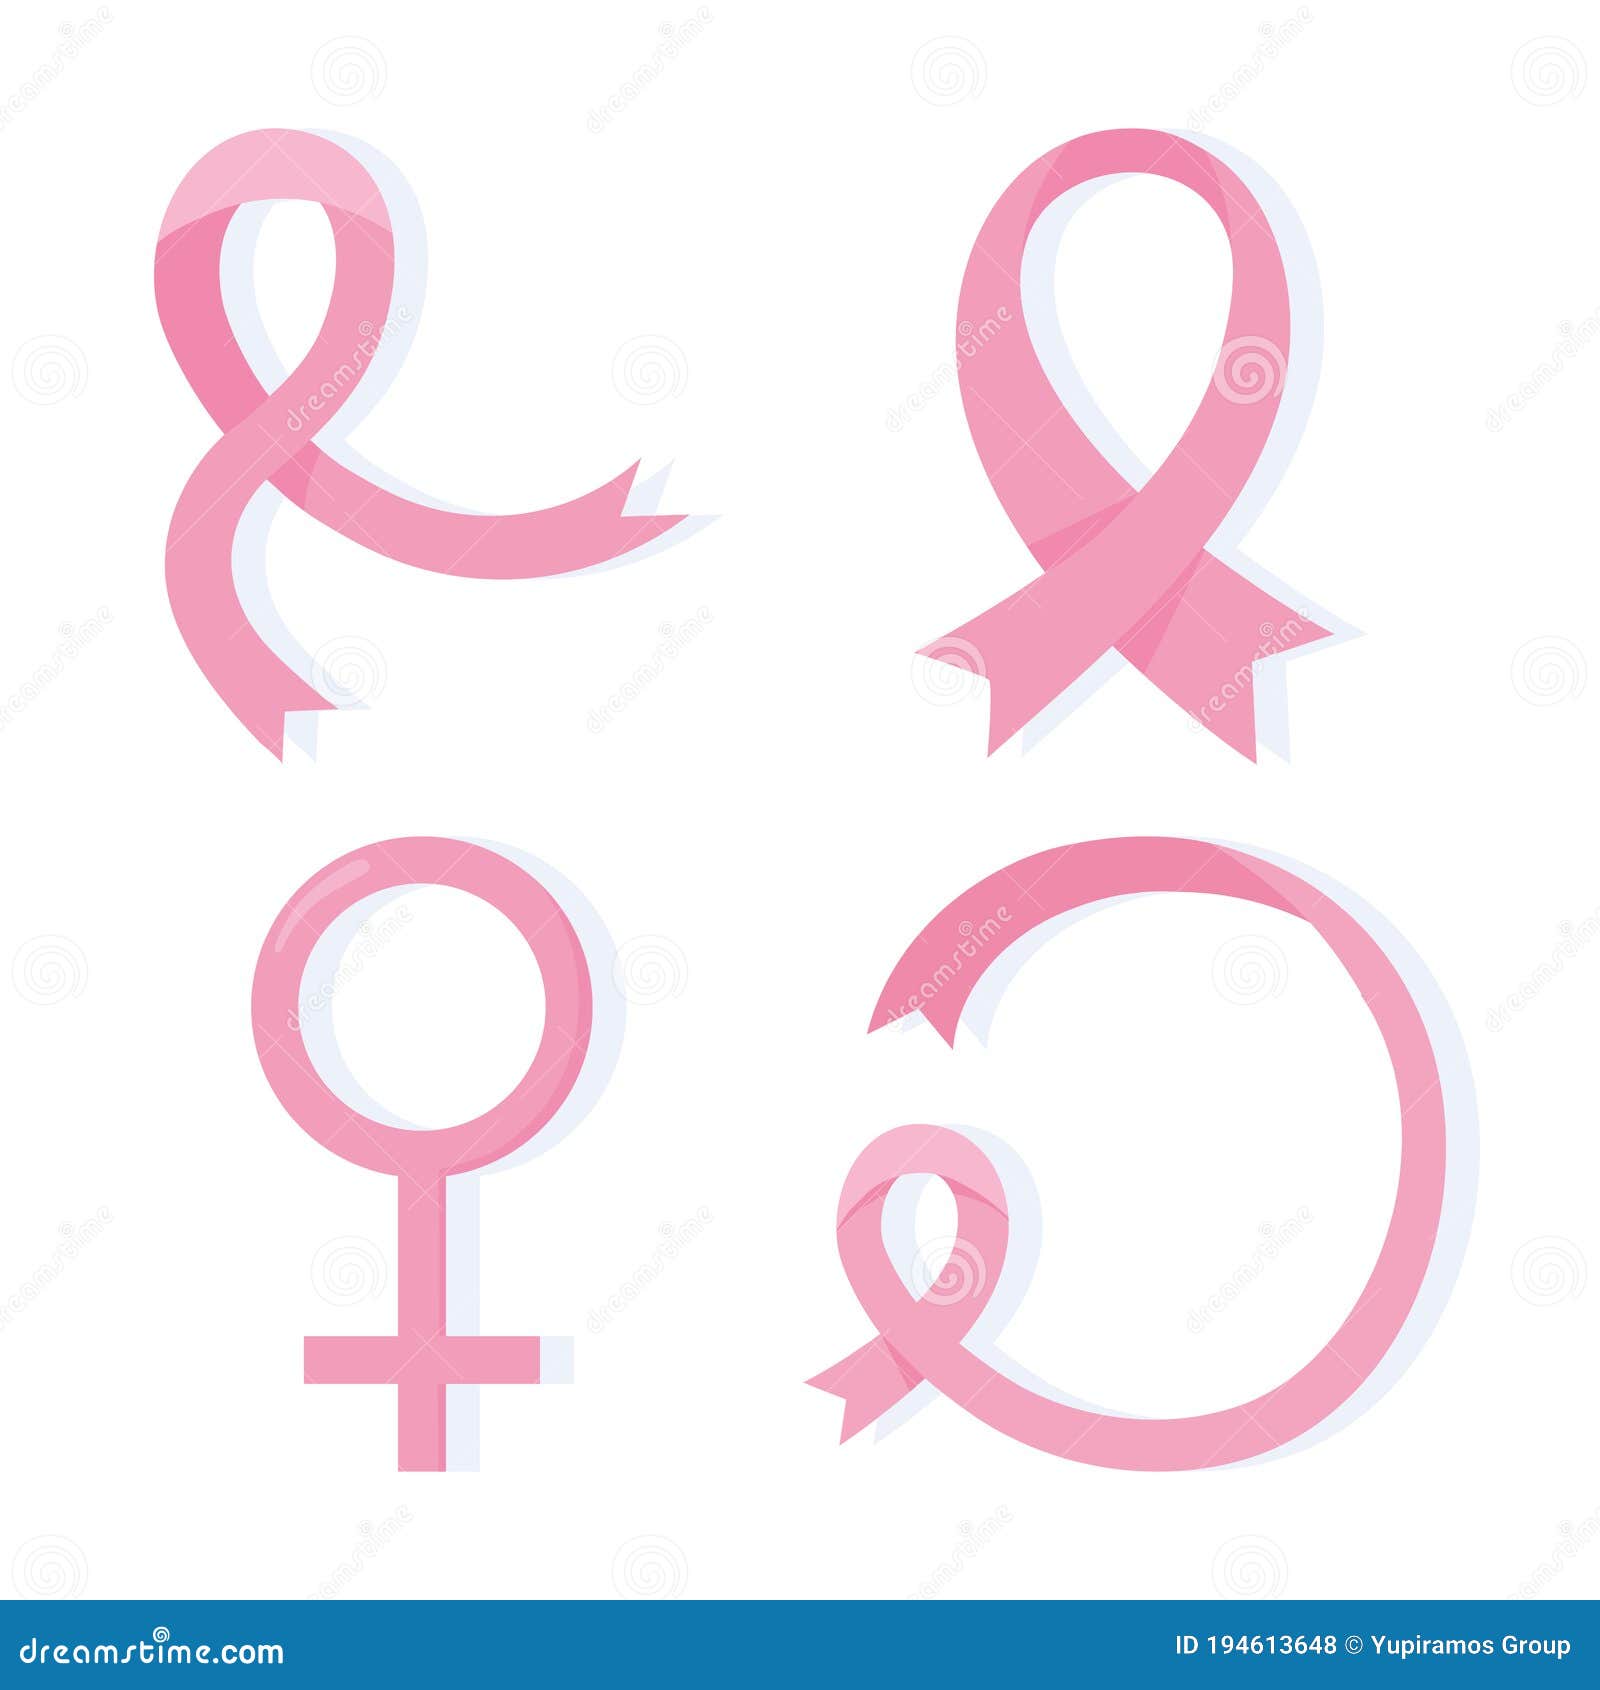 Breast Shapes Icons In Flat Style. Illustration Royalty Free SVG, Cliparts,  Vectors, and Stock Illustration. Image 56382090.